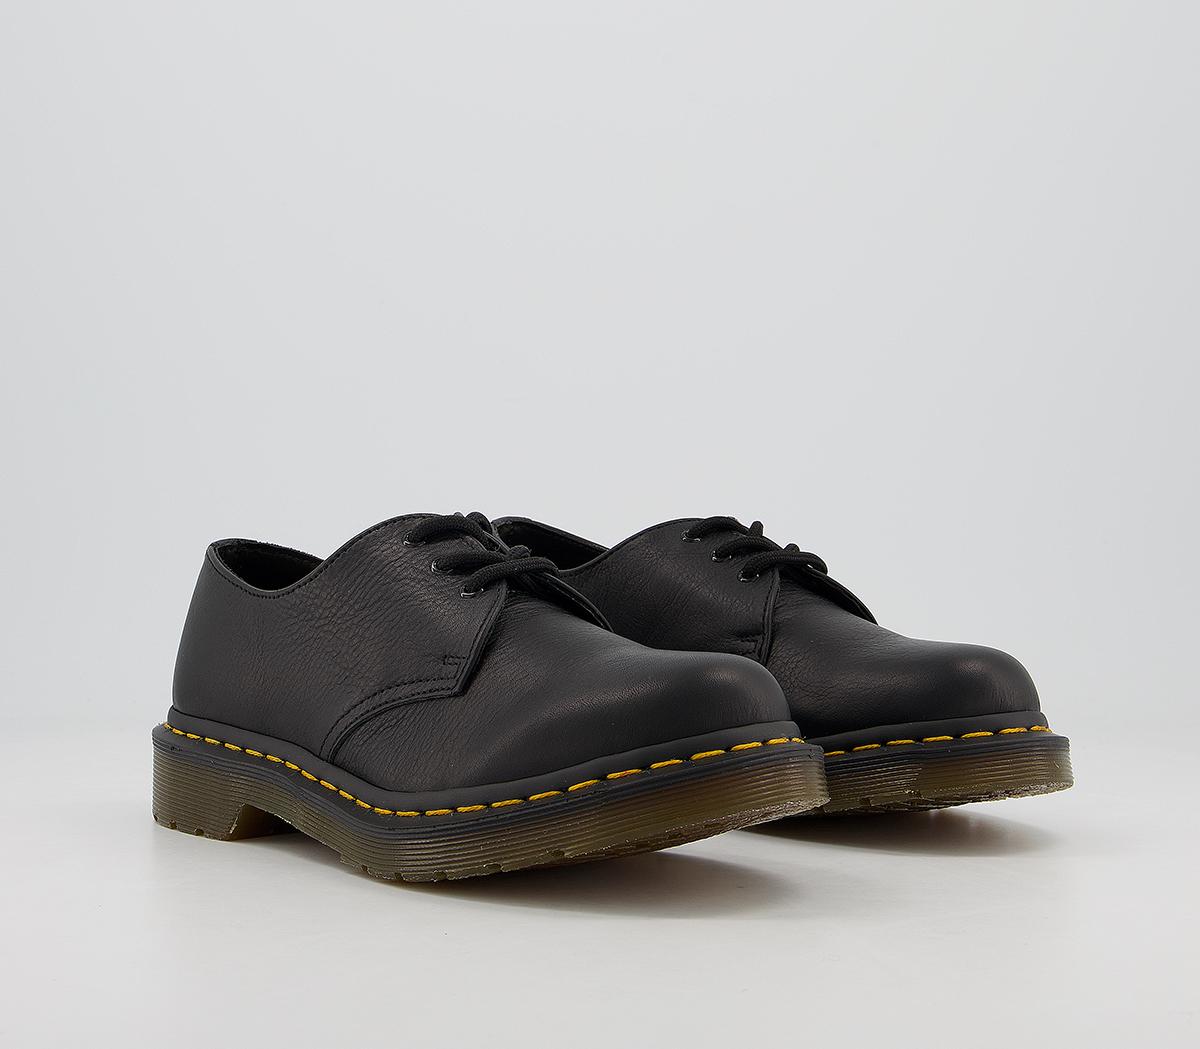 Dr. Martens Womens Classic 3-eyelet Black Virginia Leather Shoes, 8